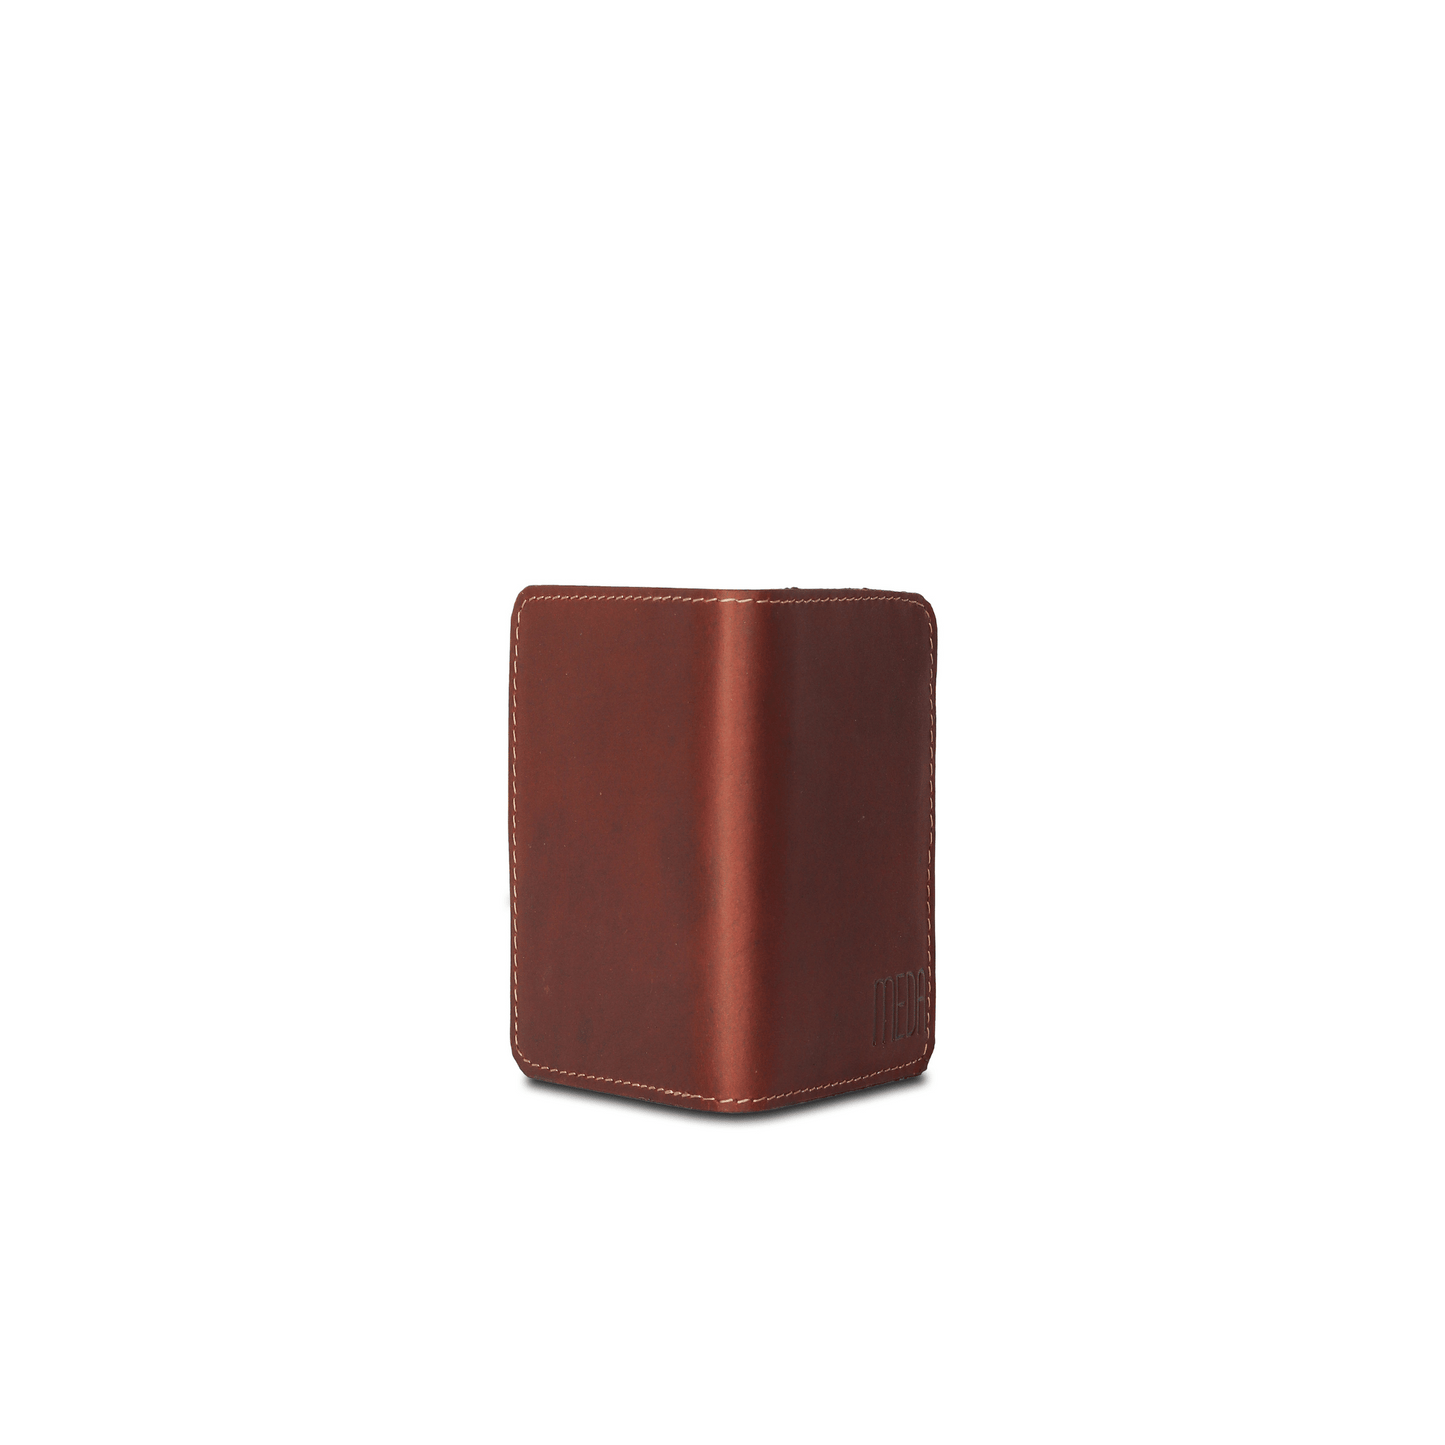 Cards Mate Card Holder Small Size Sepia Wine